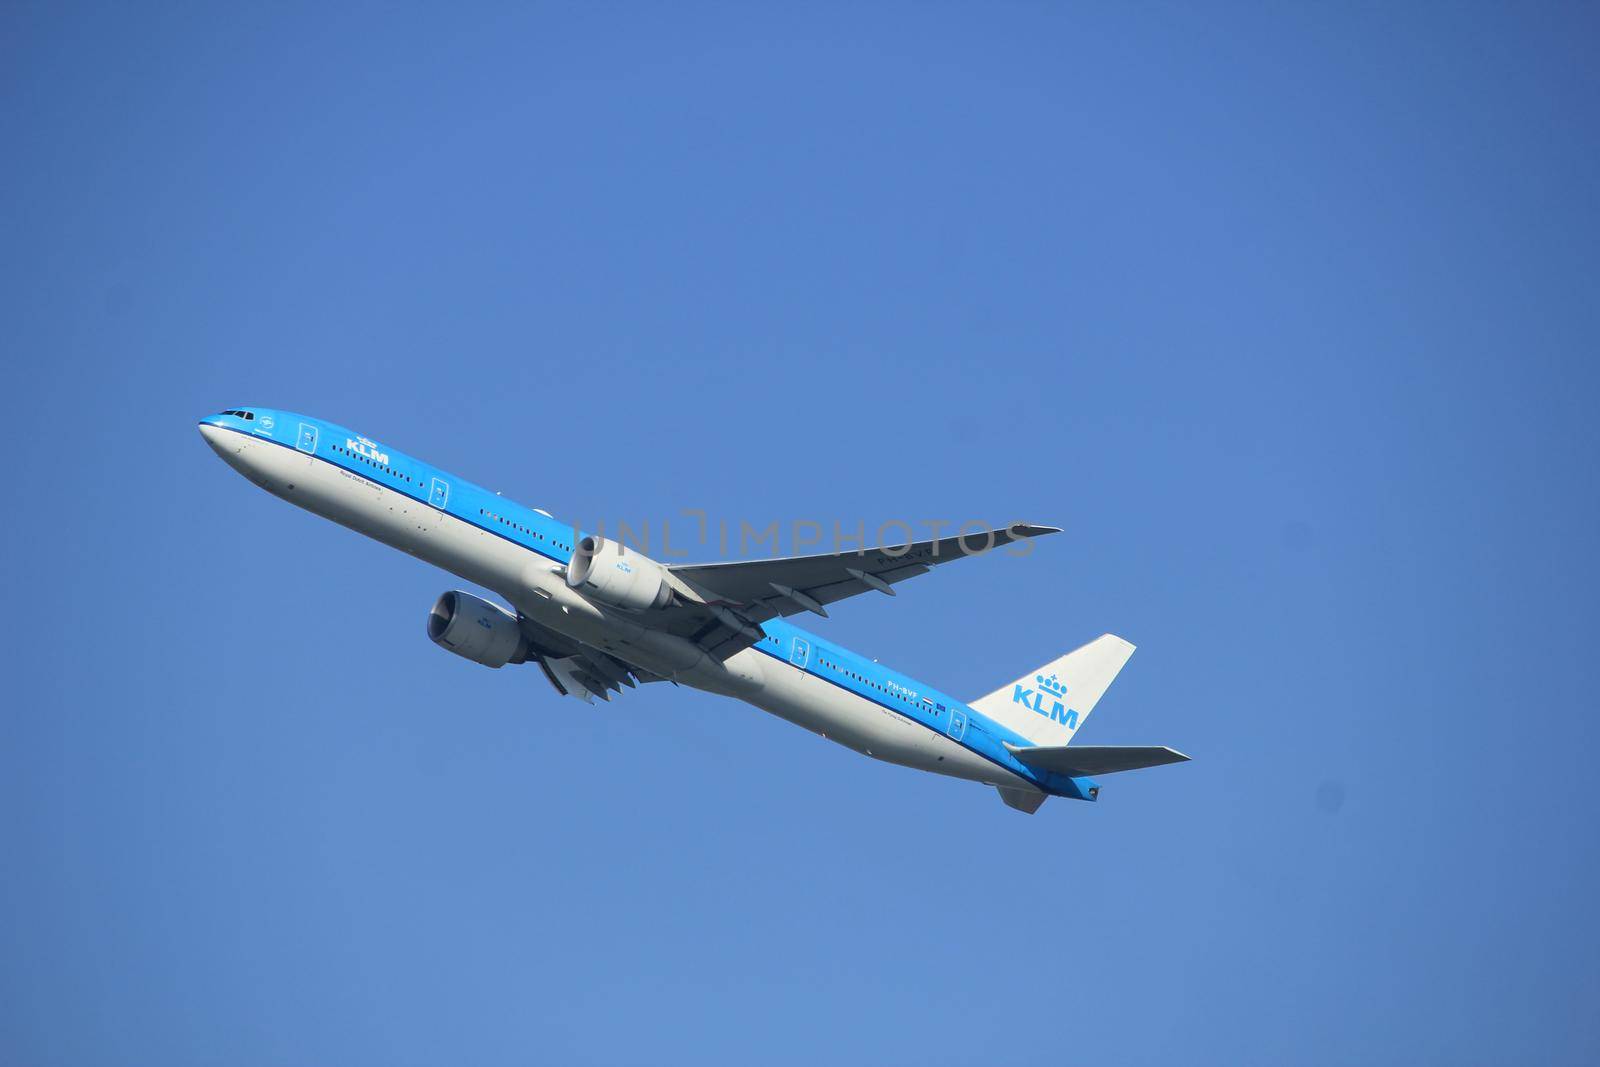 Amsterdam the Netherlands - October 15th, 2017: PH-BVF KLM Royal Dutch Airlines Boeing 777-300 takeoff from Kaagbaan runway, Amsterdam Airport Schiphol